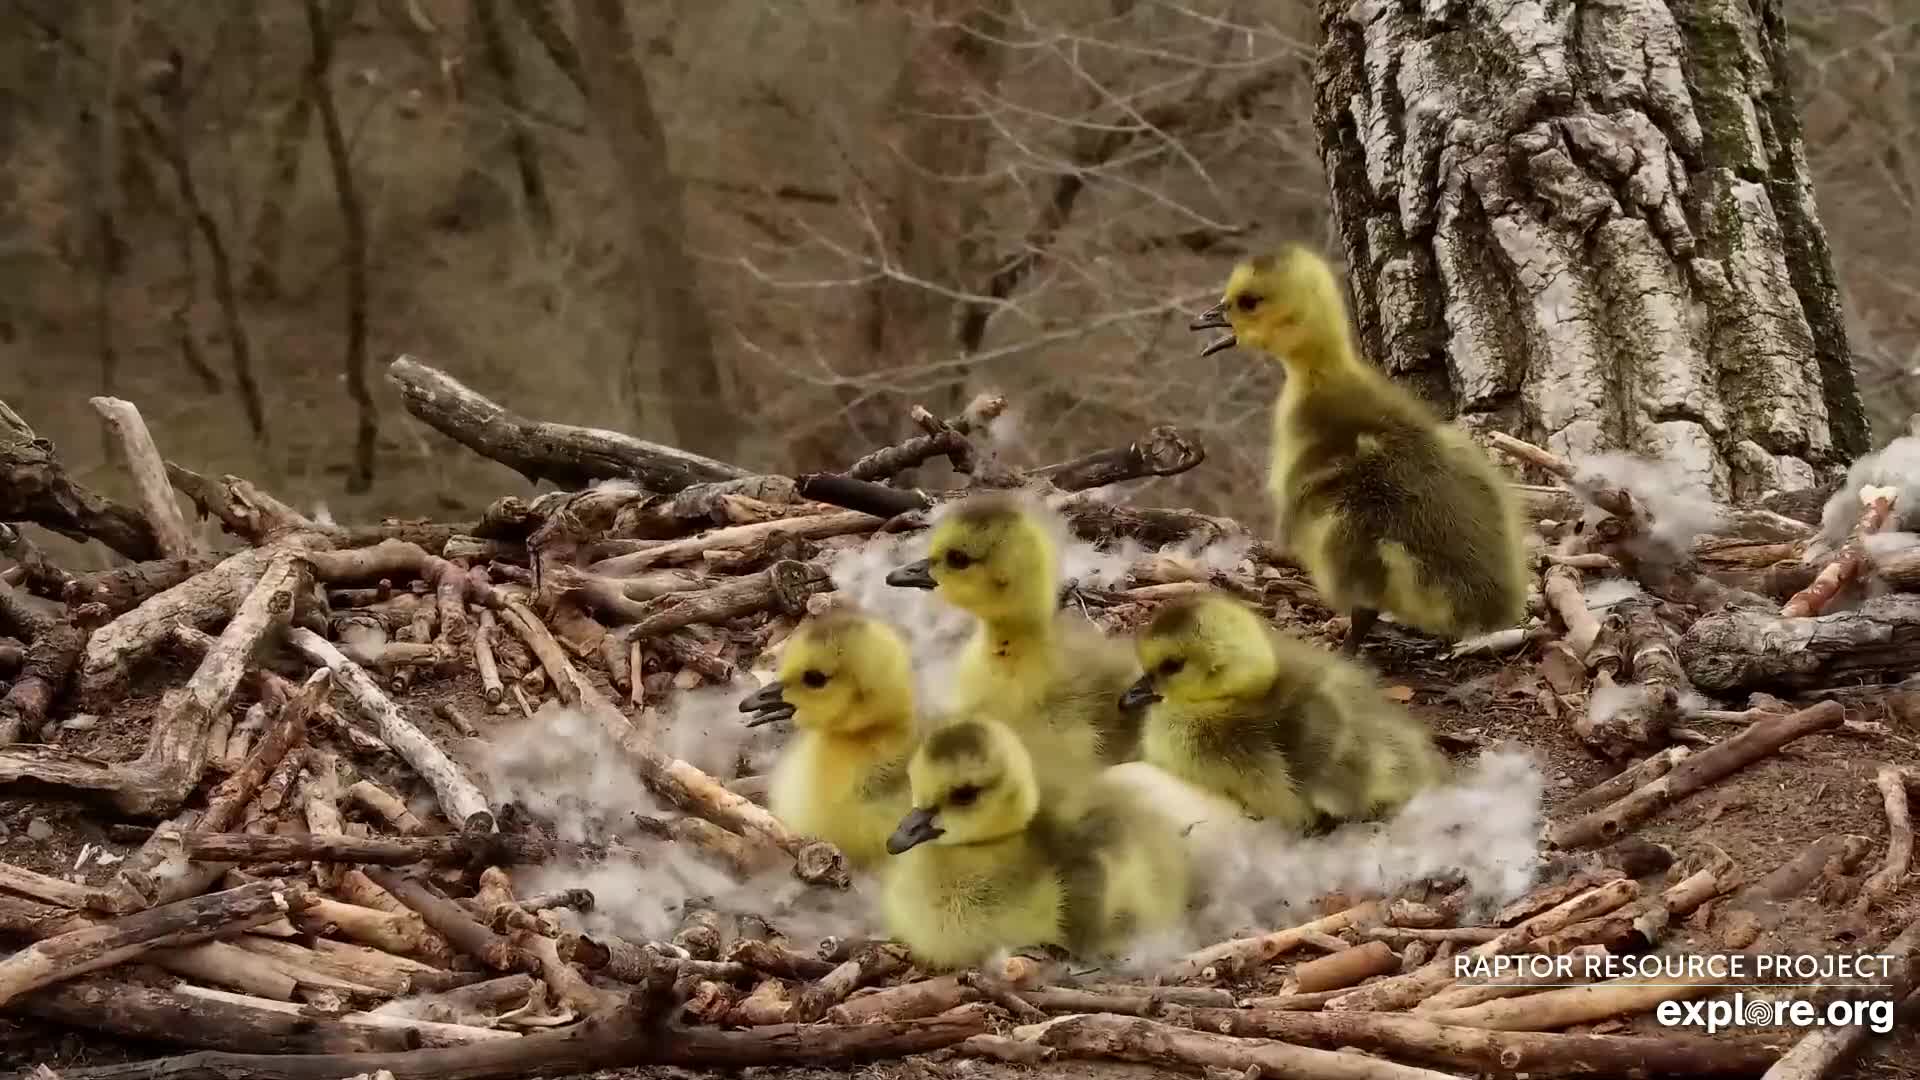 April 28, 2022: The goslings about 36 hours after hatch.